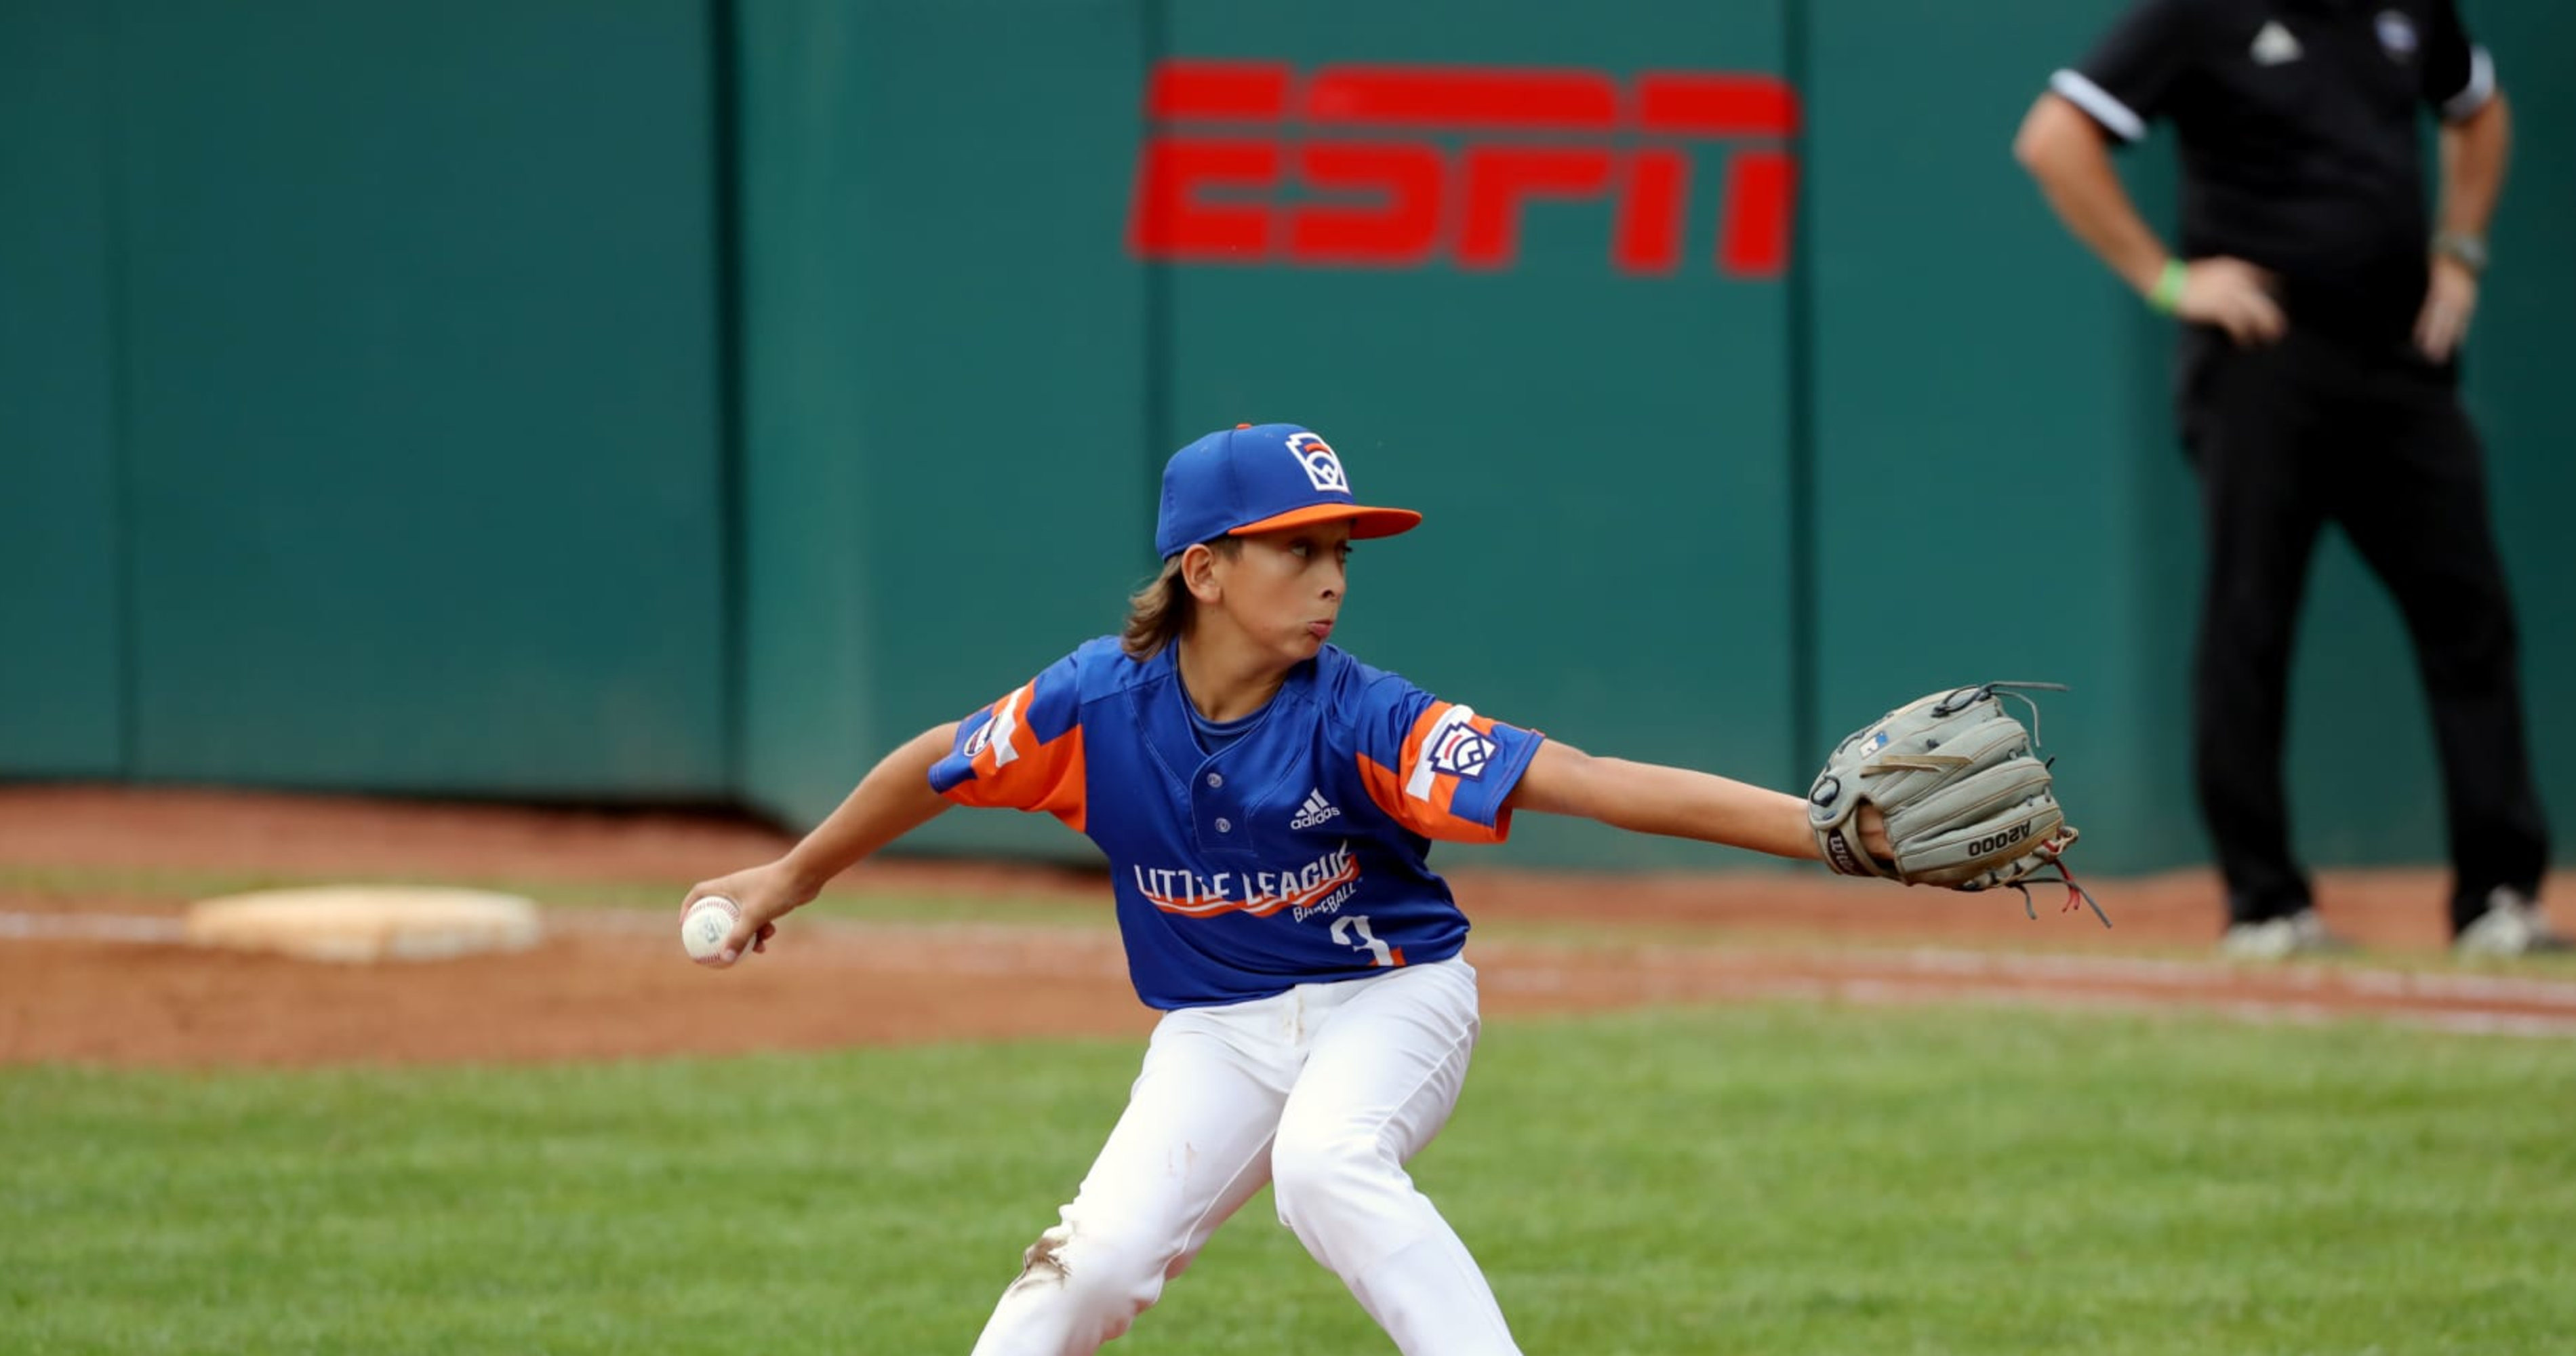 How to Watch Little League Baseball World Series on August 20